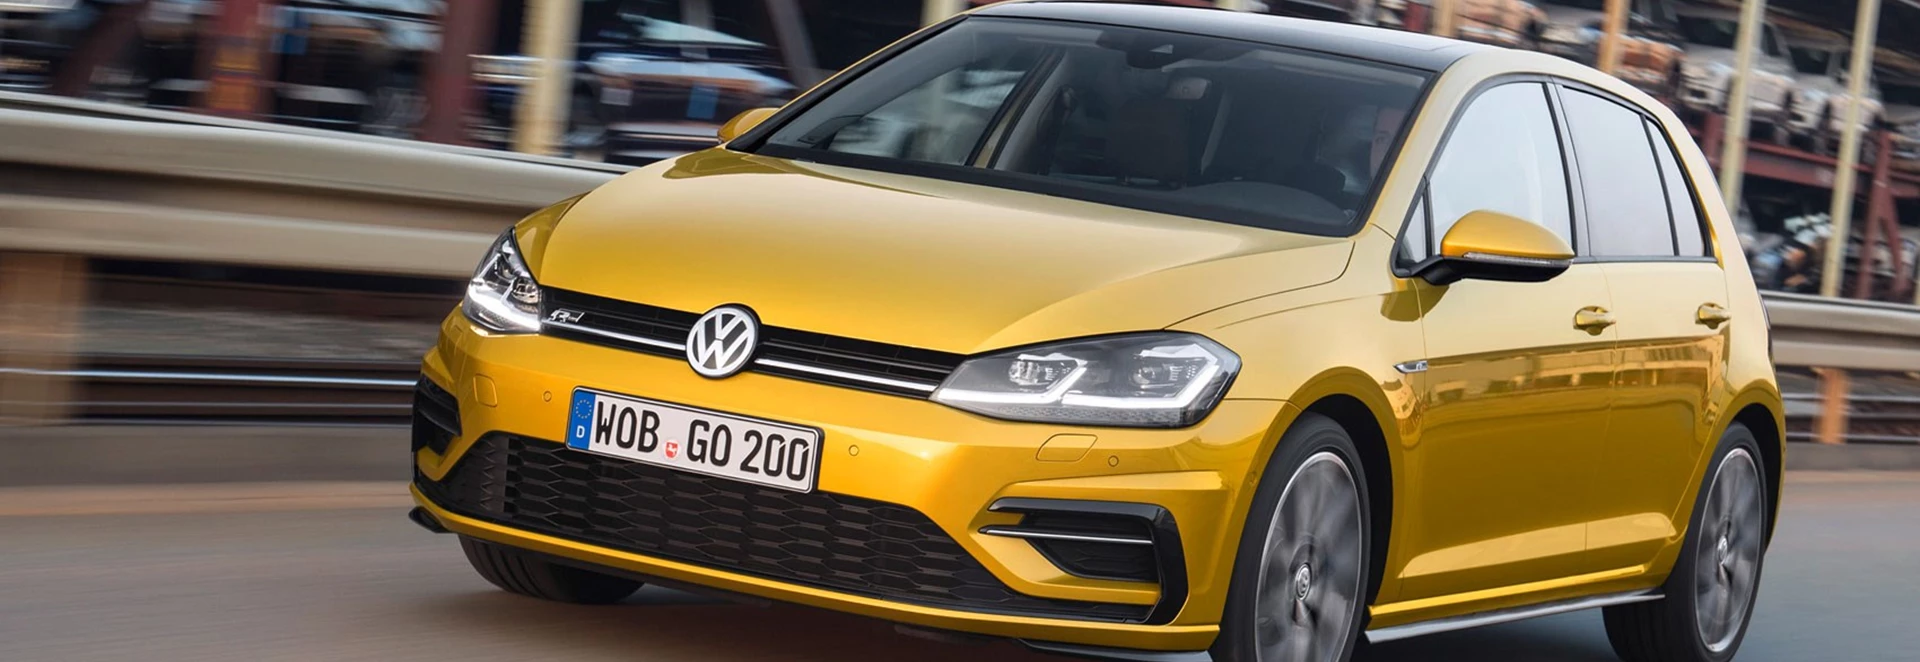 2017 Volkswagen Golf to be unveiled early November